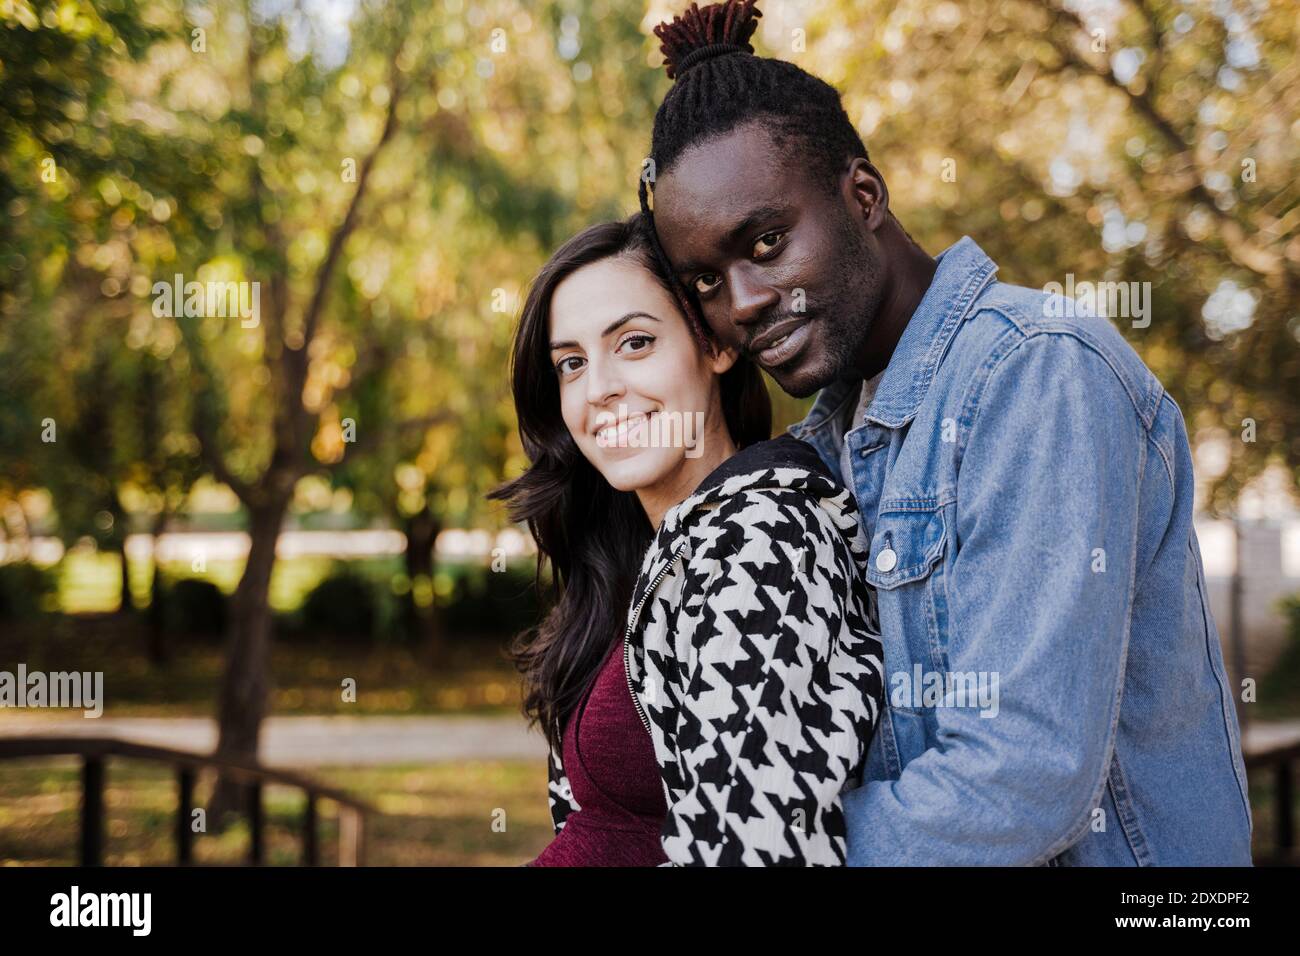 Smiling multi ethnic couple embracing while standing in park Stock Photo